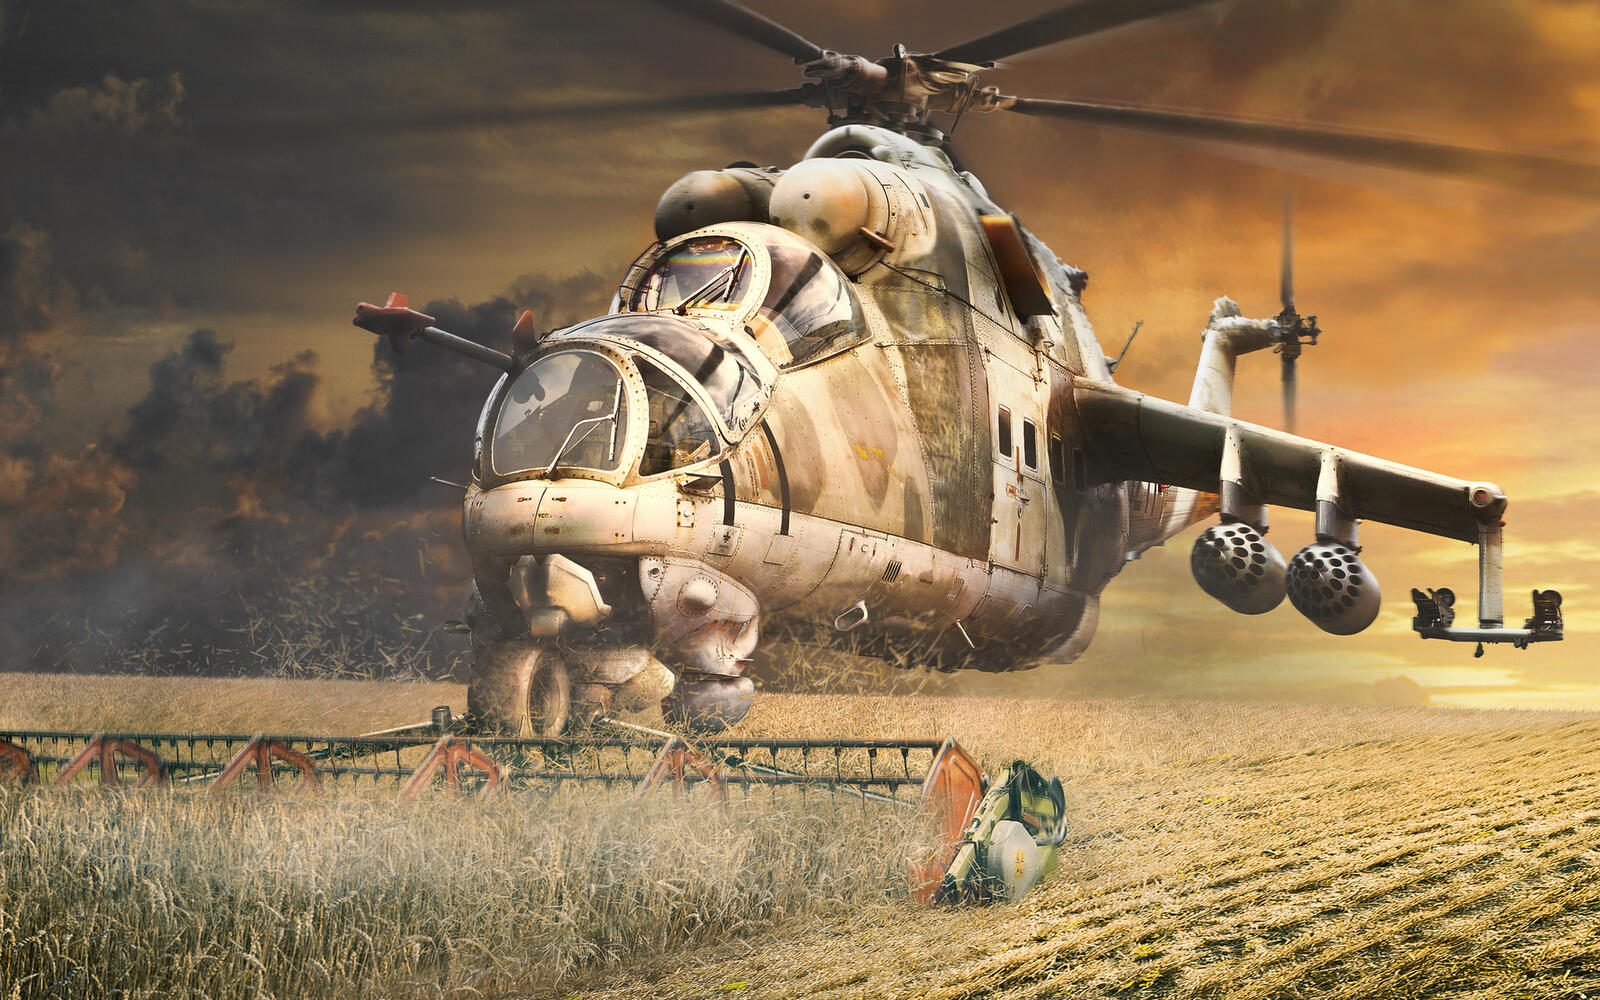 Wallpapers helicopter millstone straw on the desktop